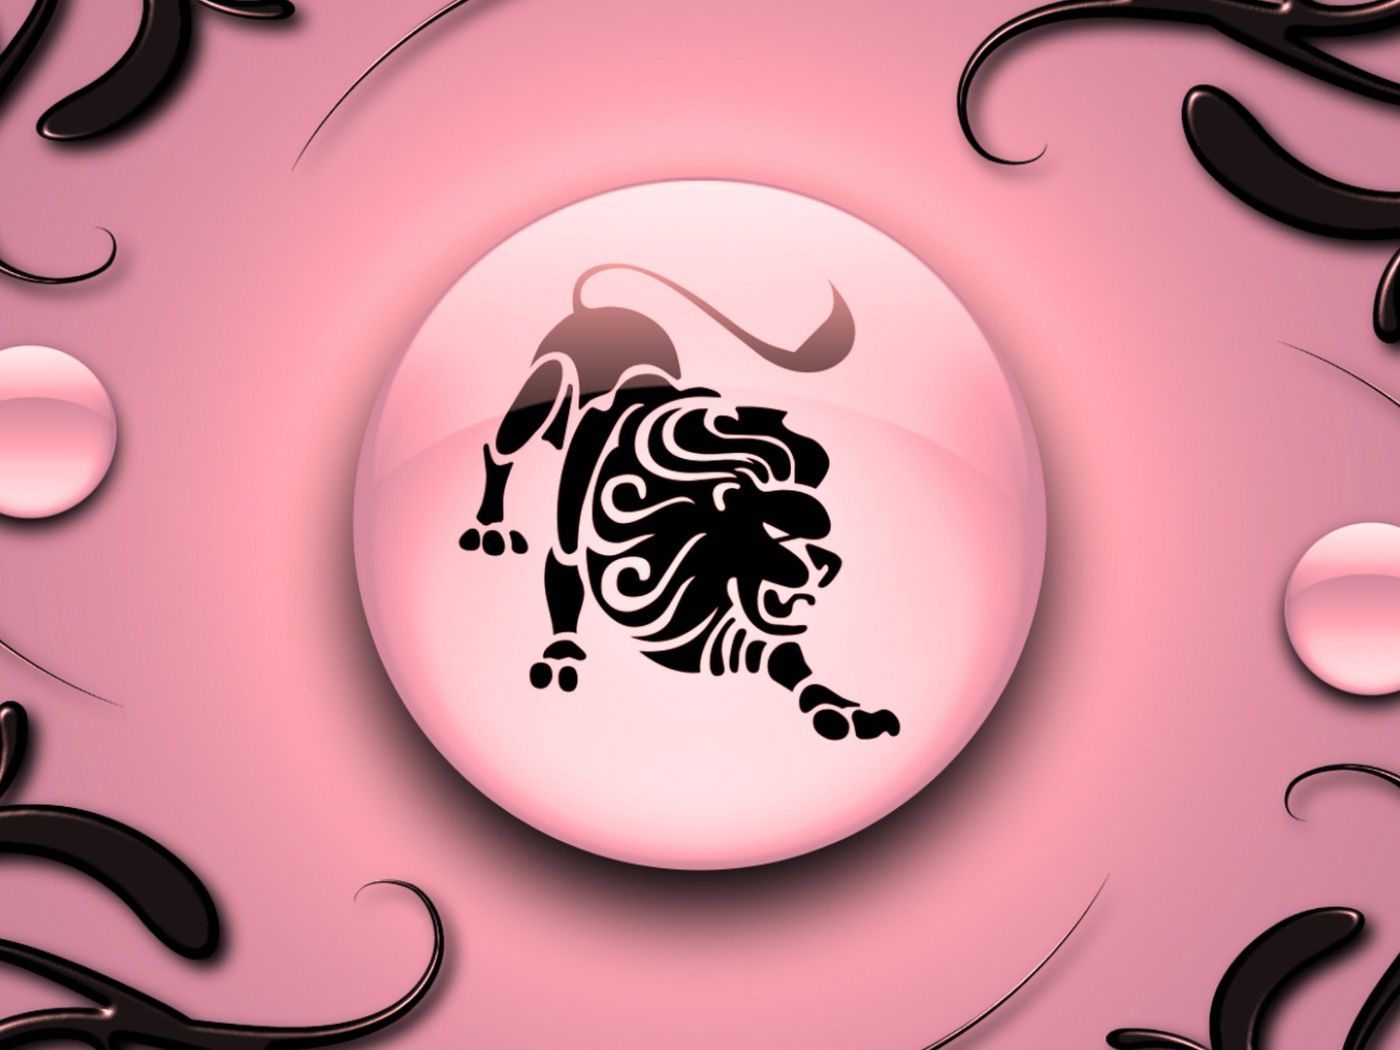 Leo on a pink background with black ornament Desktop wallpaper 1400x1050